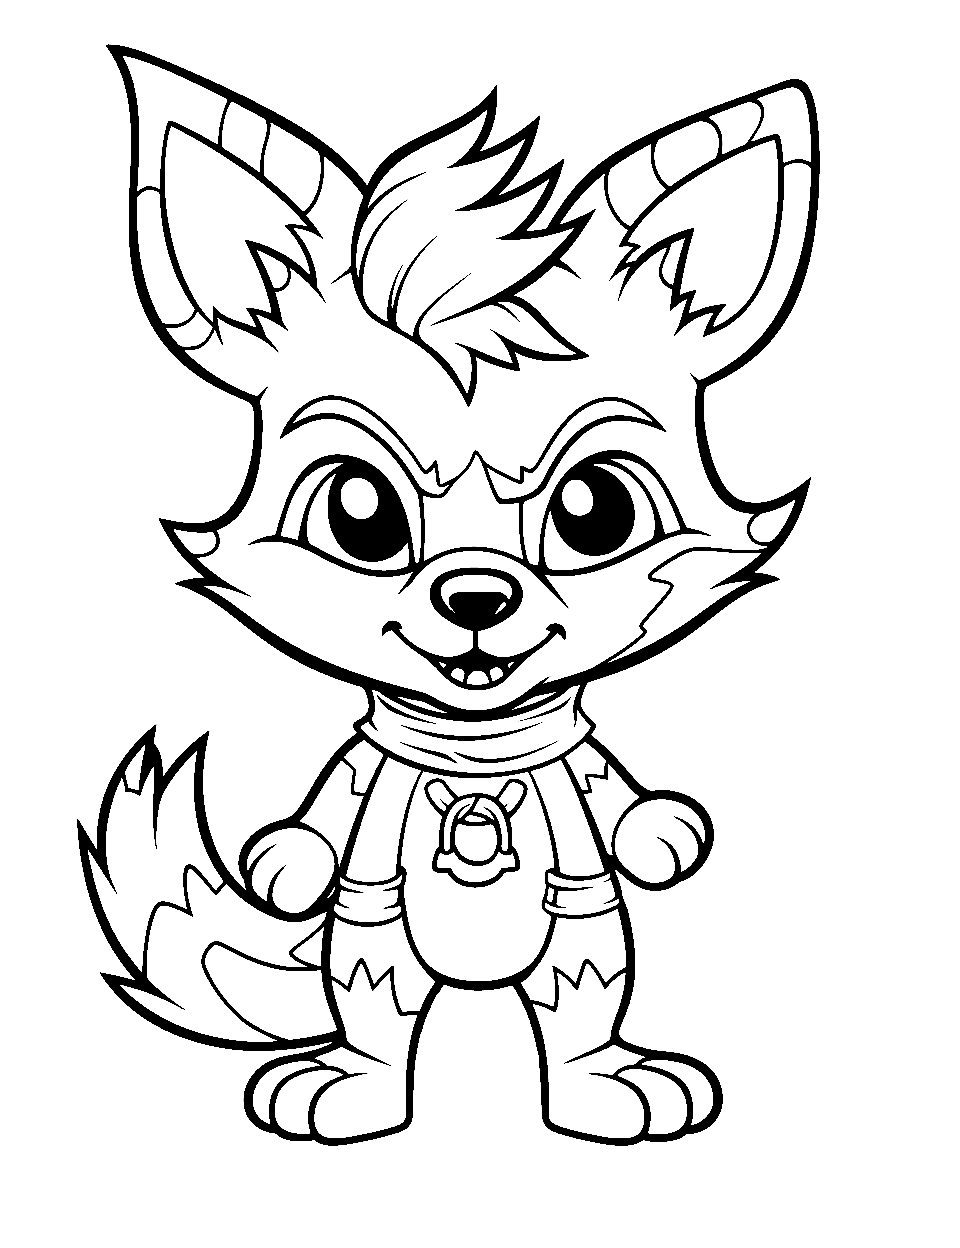 Easy Breezy Chibi Foxy Coloring Page - An easy-to-color image of a chibi Foxy in a relaxed pose.